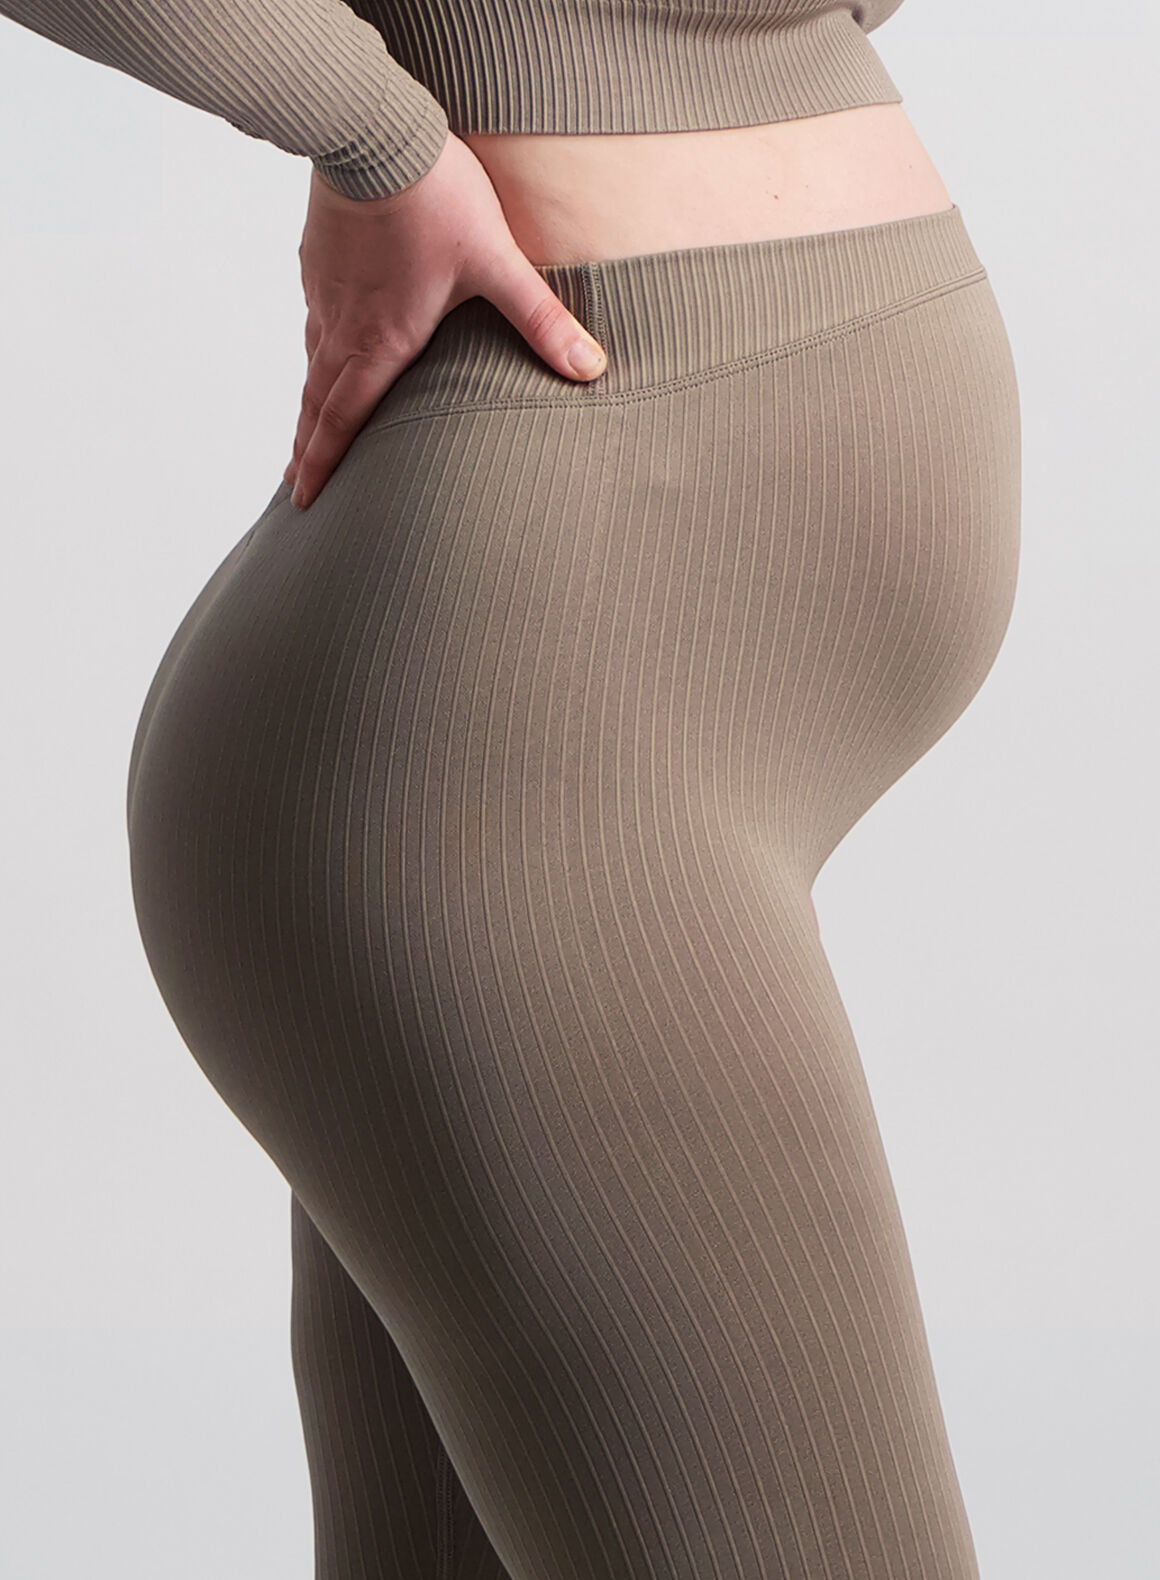 Aim'n - MATERNITY RIBBED SEAMLESS TIGHTS in Espresso - XS, BRN1, super-hi-res image number null